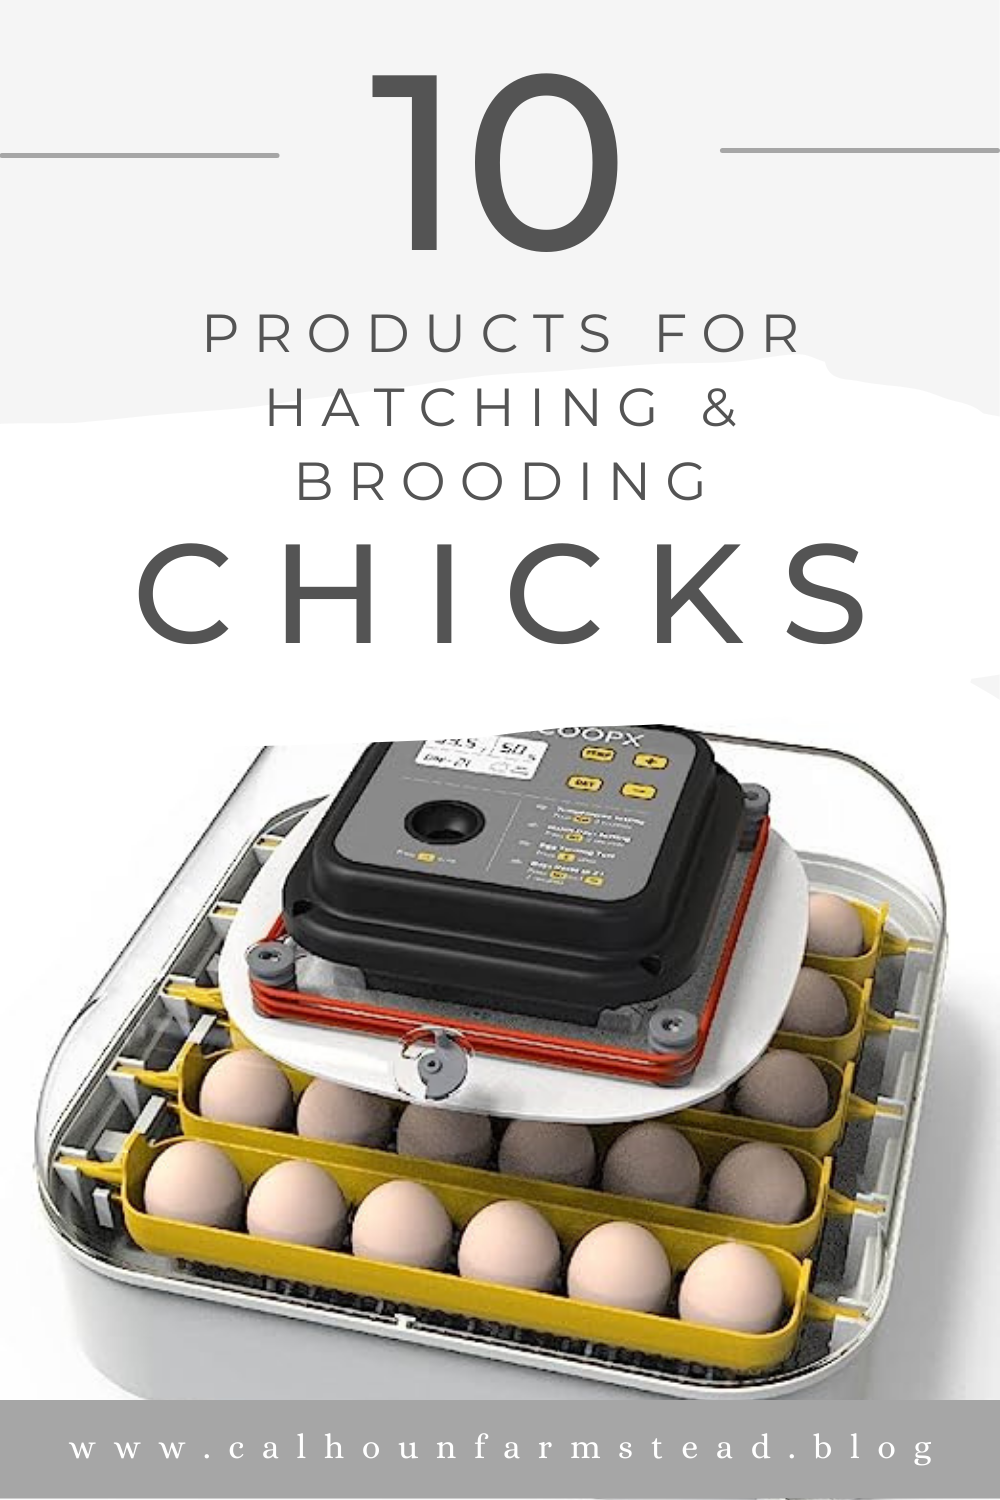 10 Products for Hatching and Brooding Chicks!